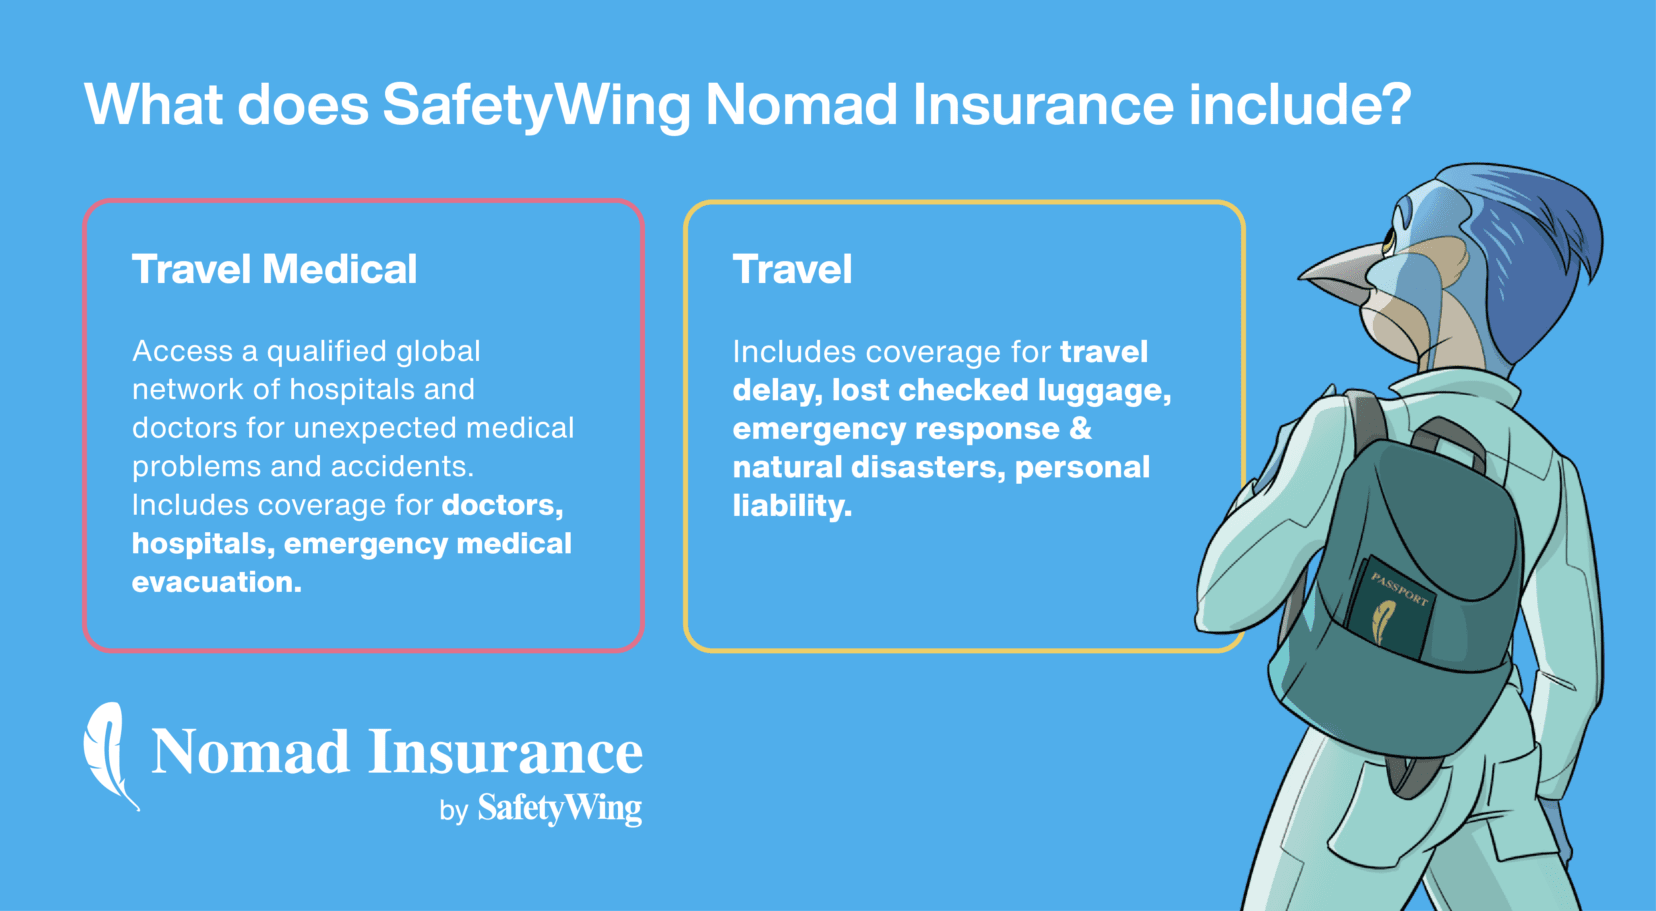 List of Benefits from Safetywing travel insurance